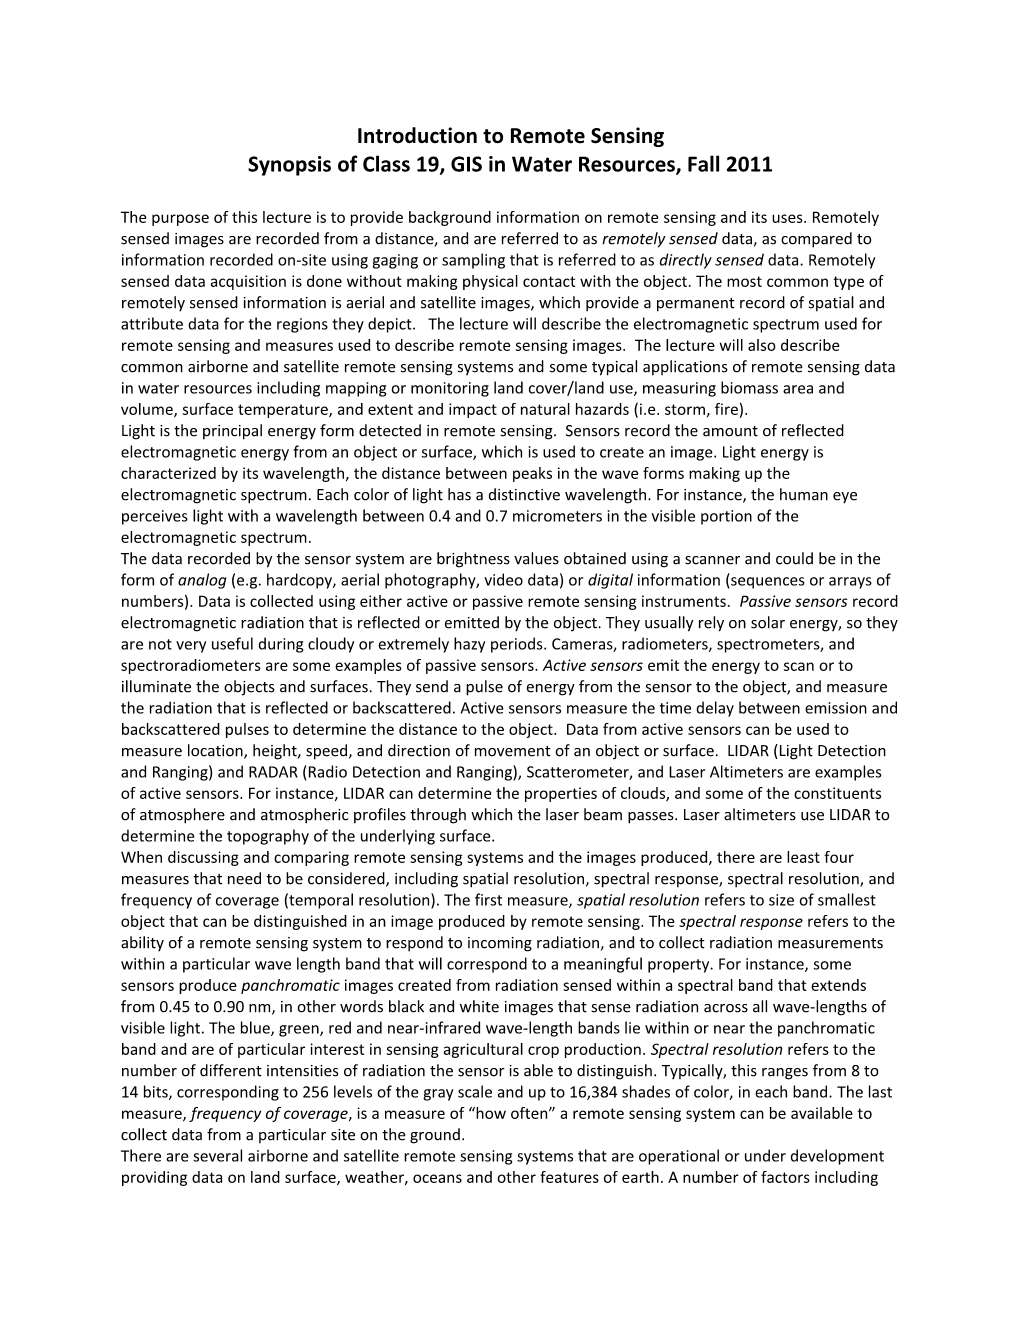 Synopsis of Class 19, GIS in Water Resources, Fall 2011